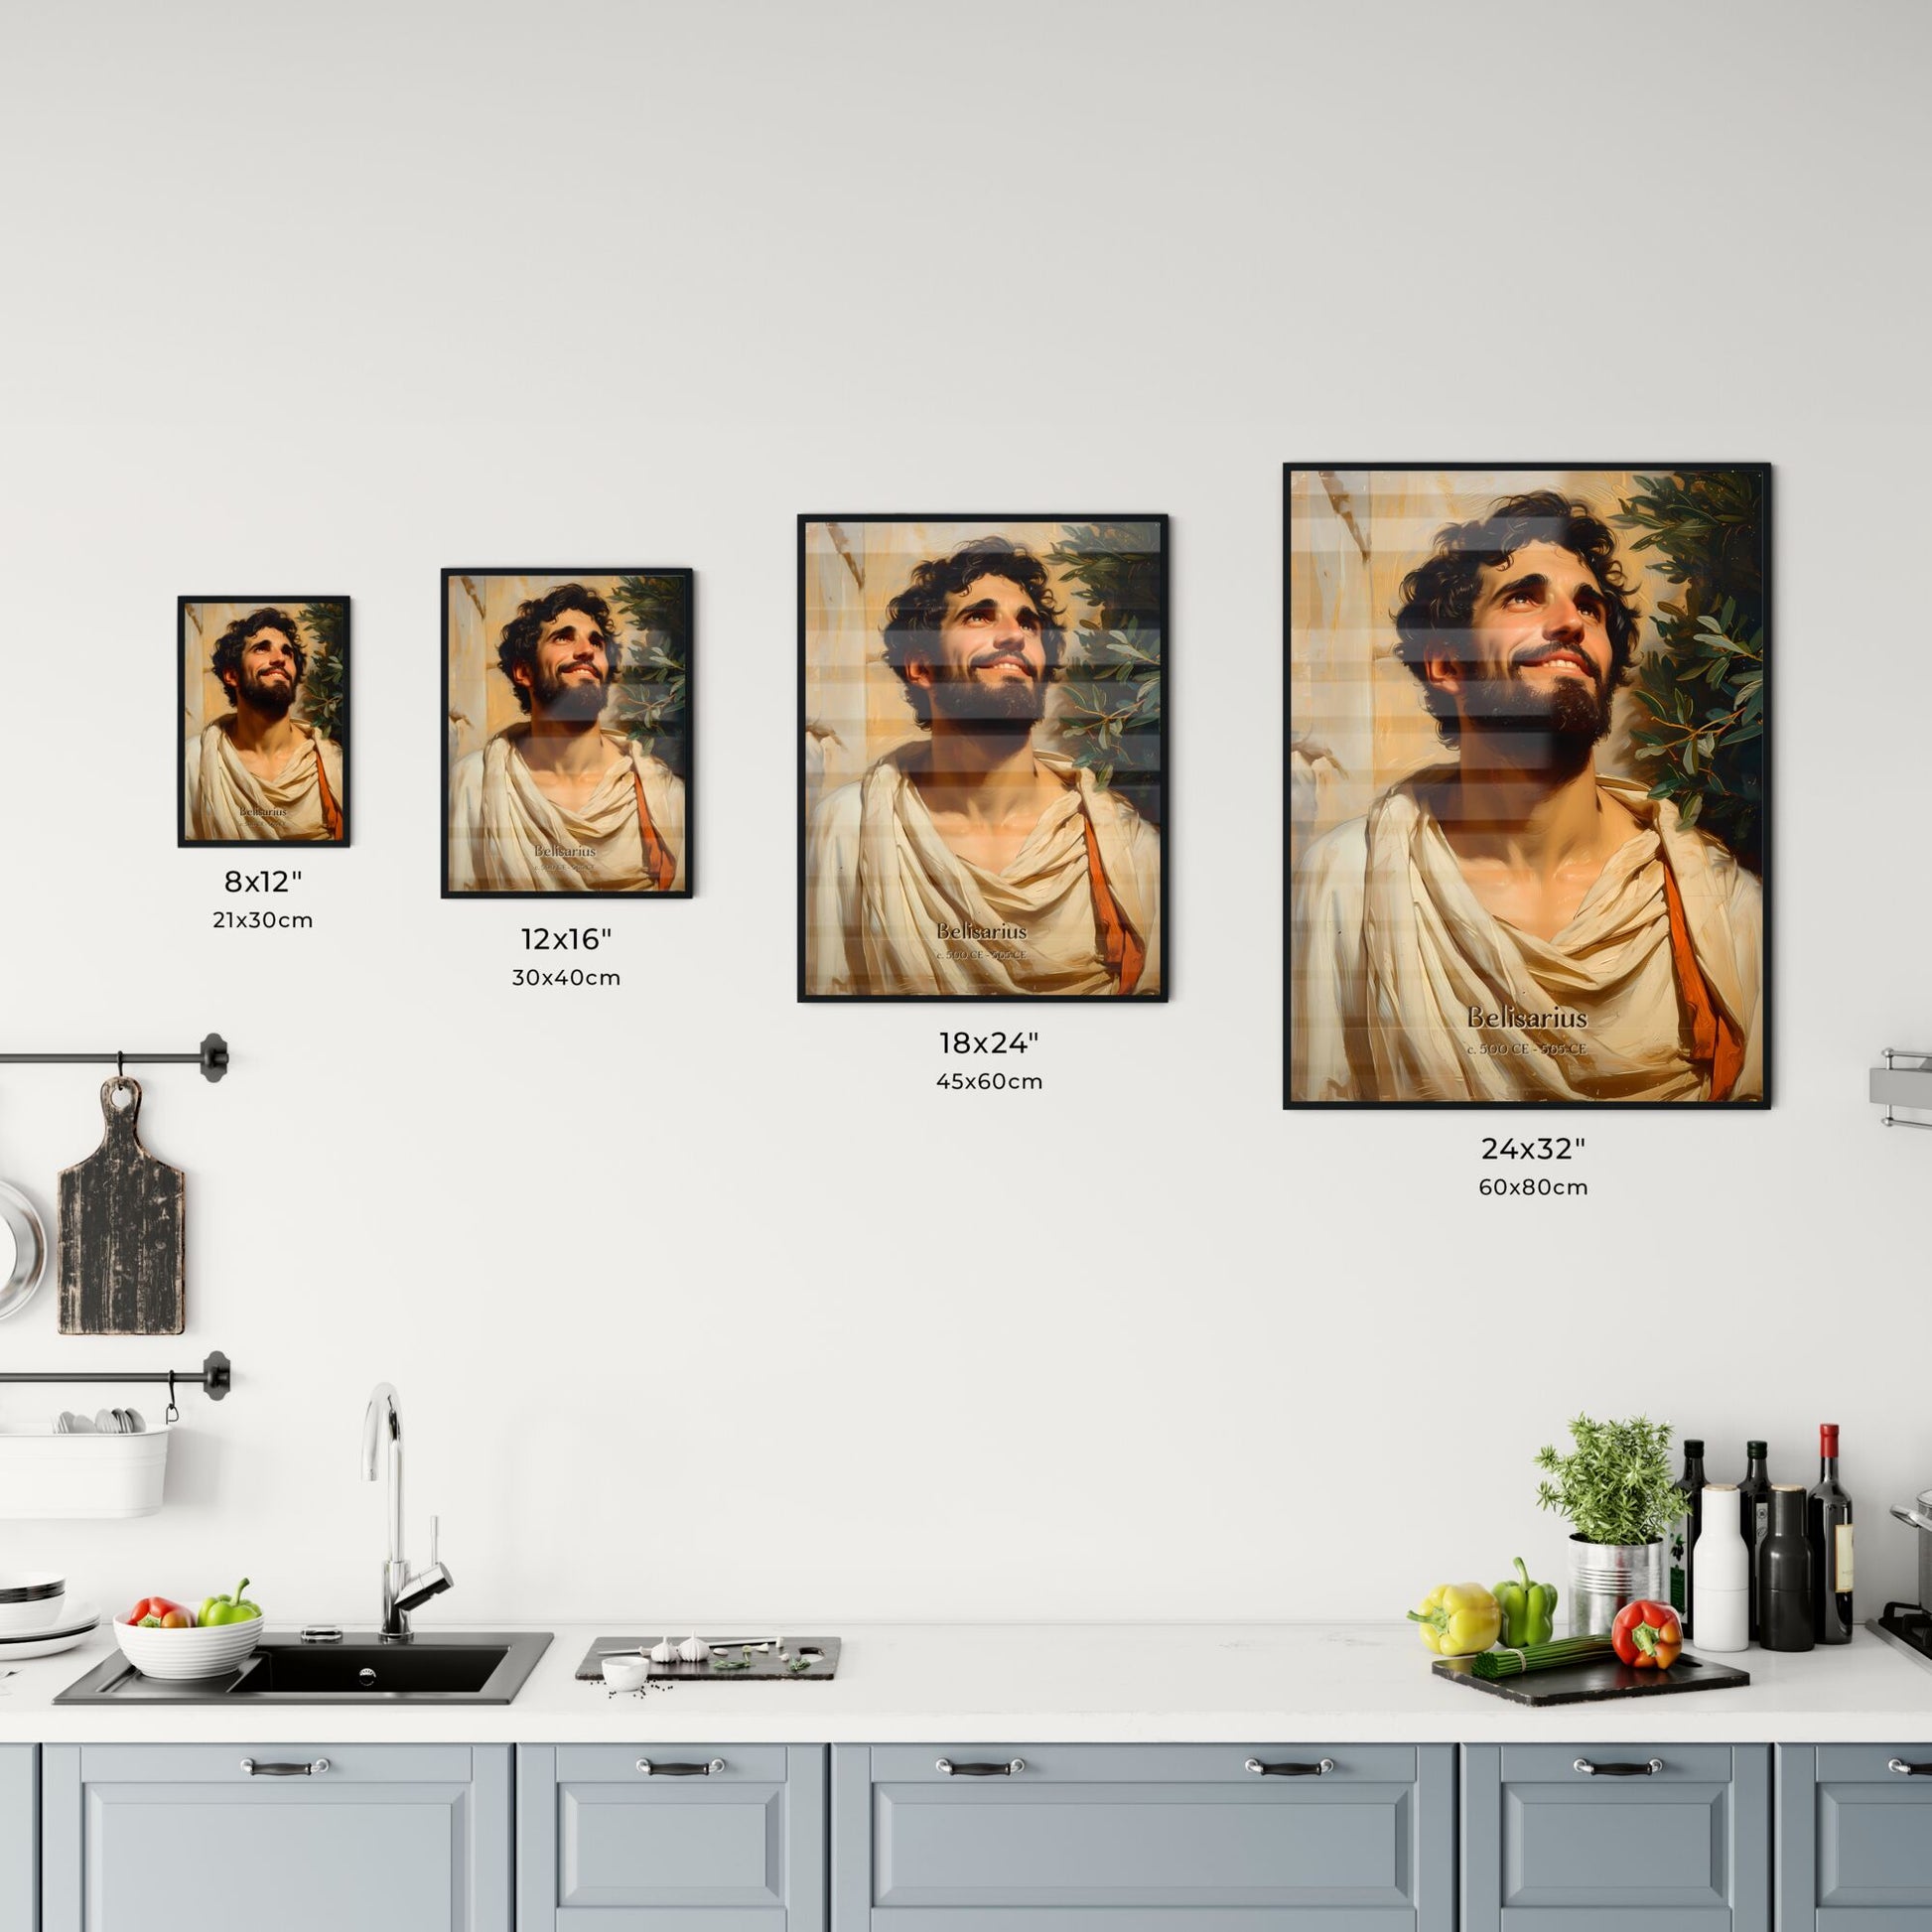 Belisarius, c. 500 CE - 565 CE, A Poster of a man in a robe looking up Default Title